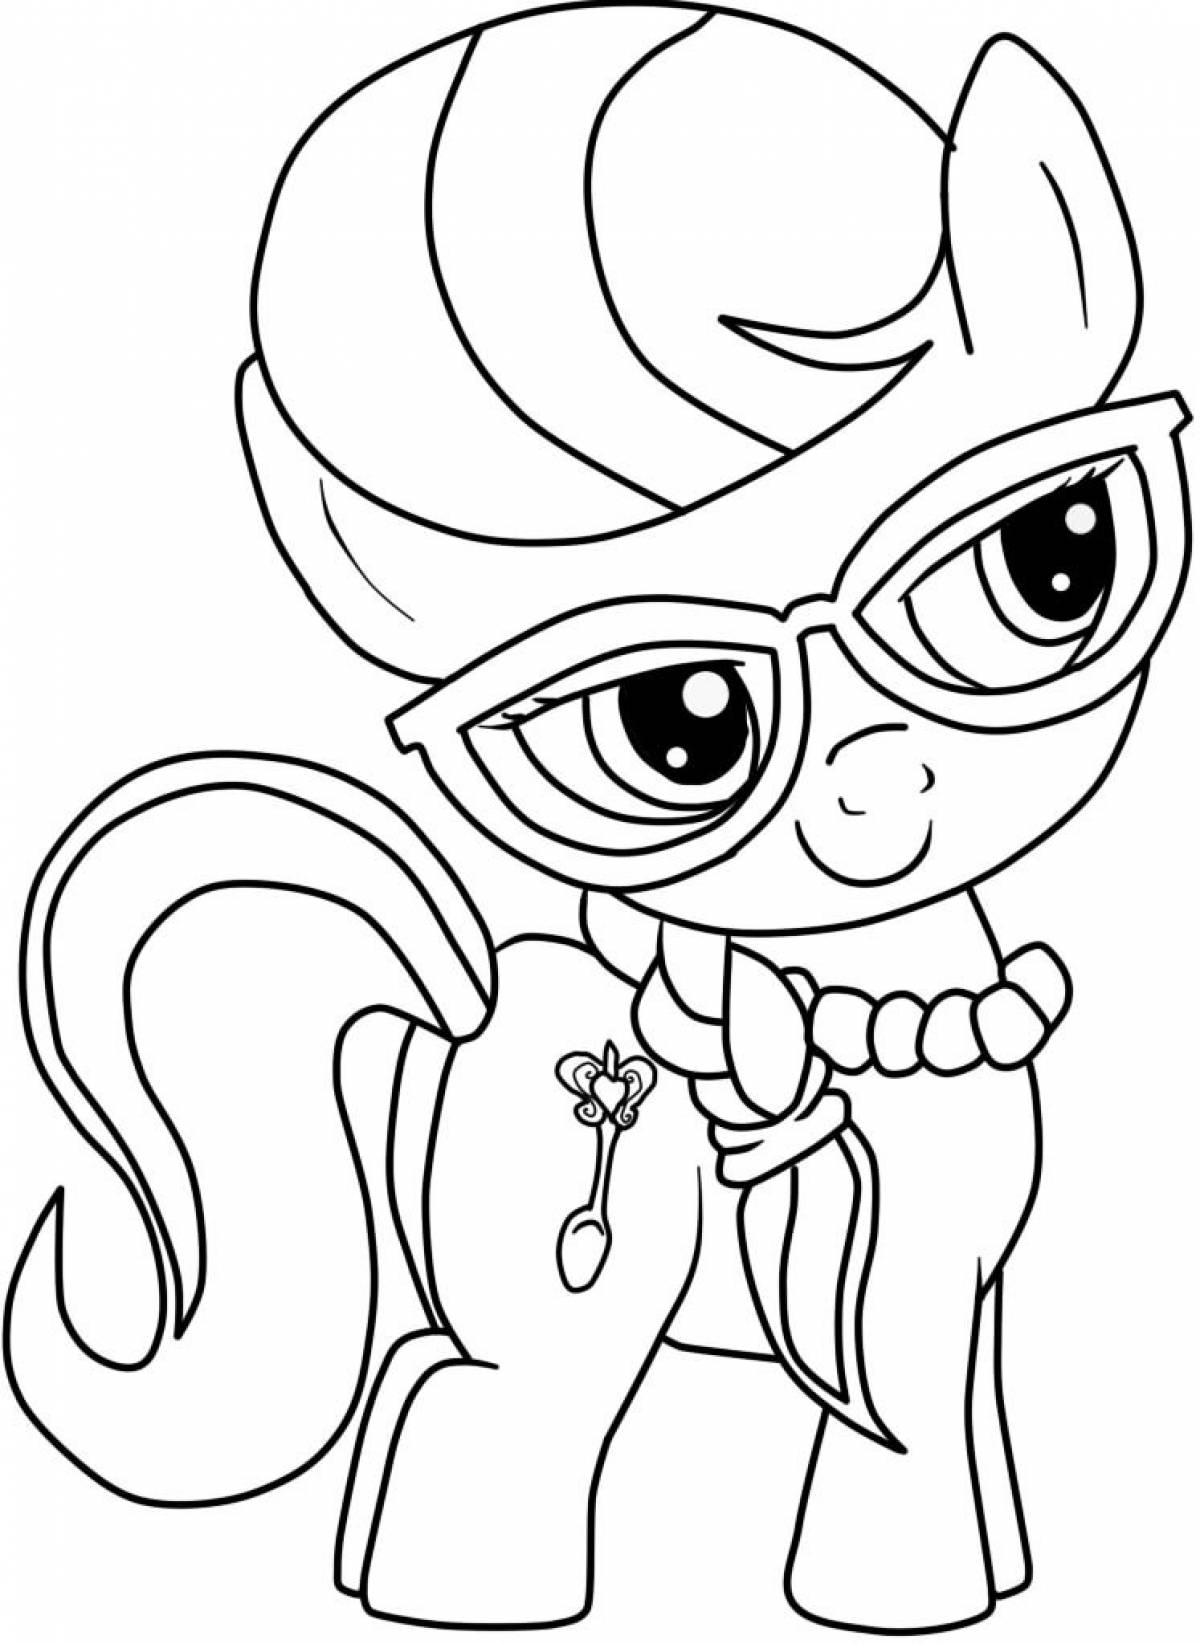 Ponyville coloring pages printable